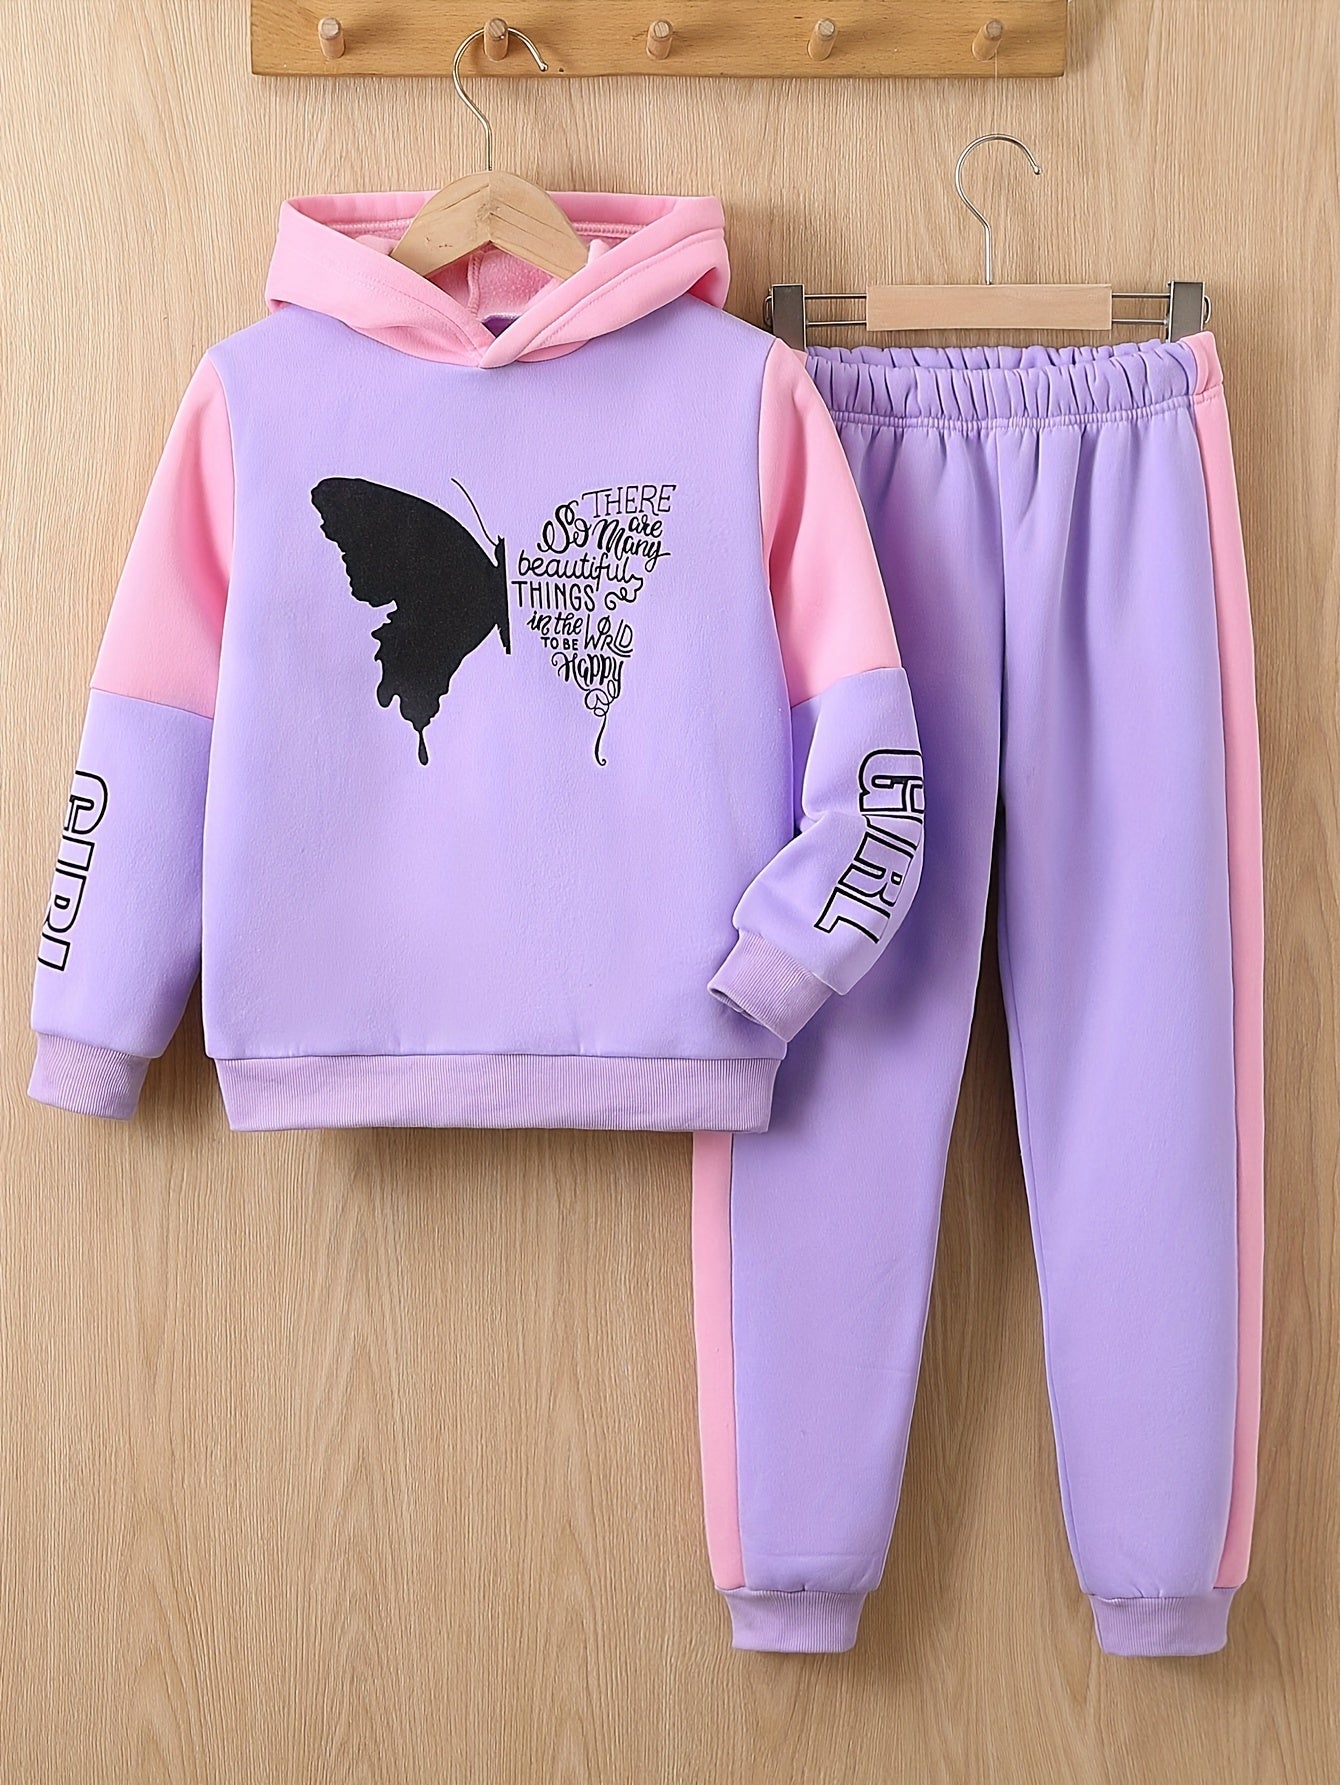 Girls 2-piece Butterfly Print Fleece Hooded Sweatshirt And Trousers Set Kids Pre Teen Girls Warm Active Clothes For 4-12 Years Old